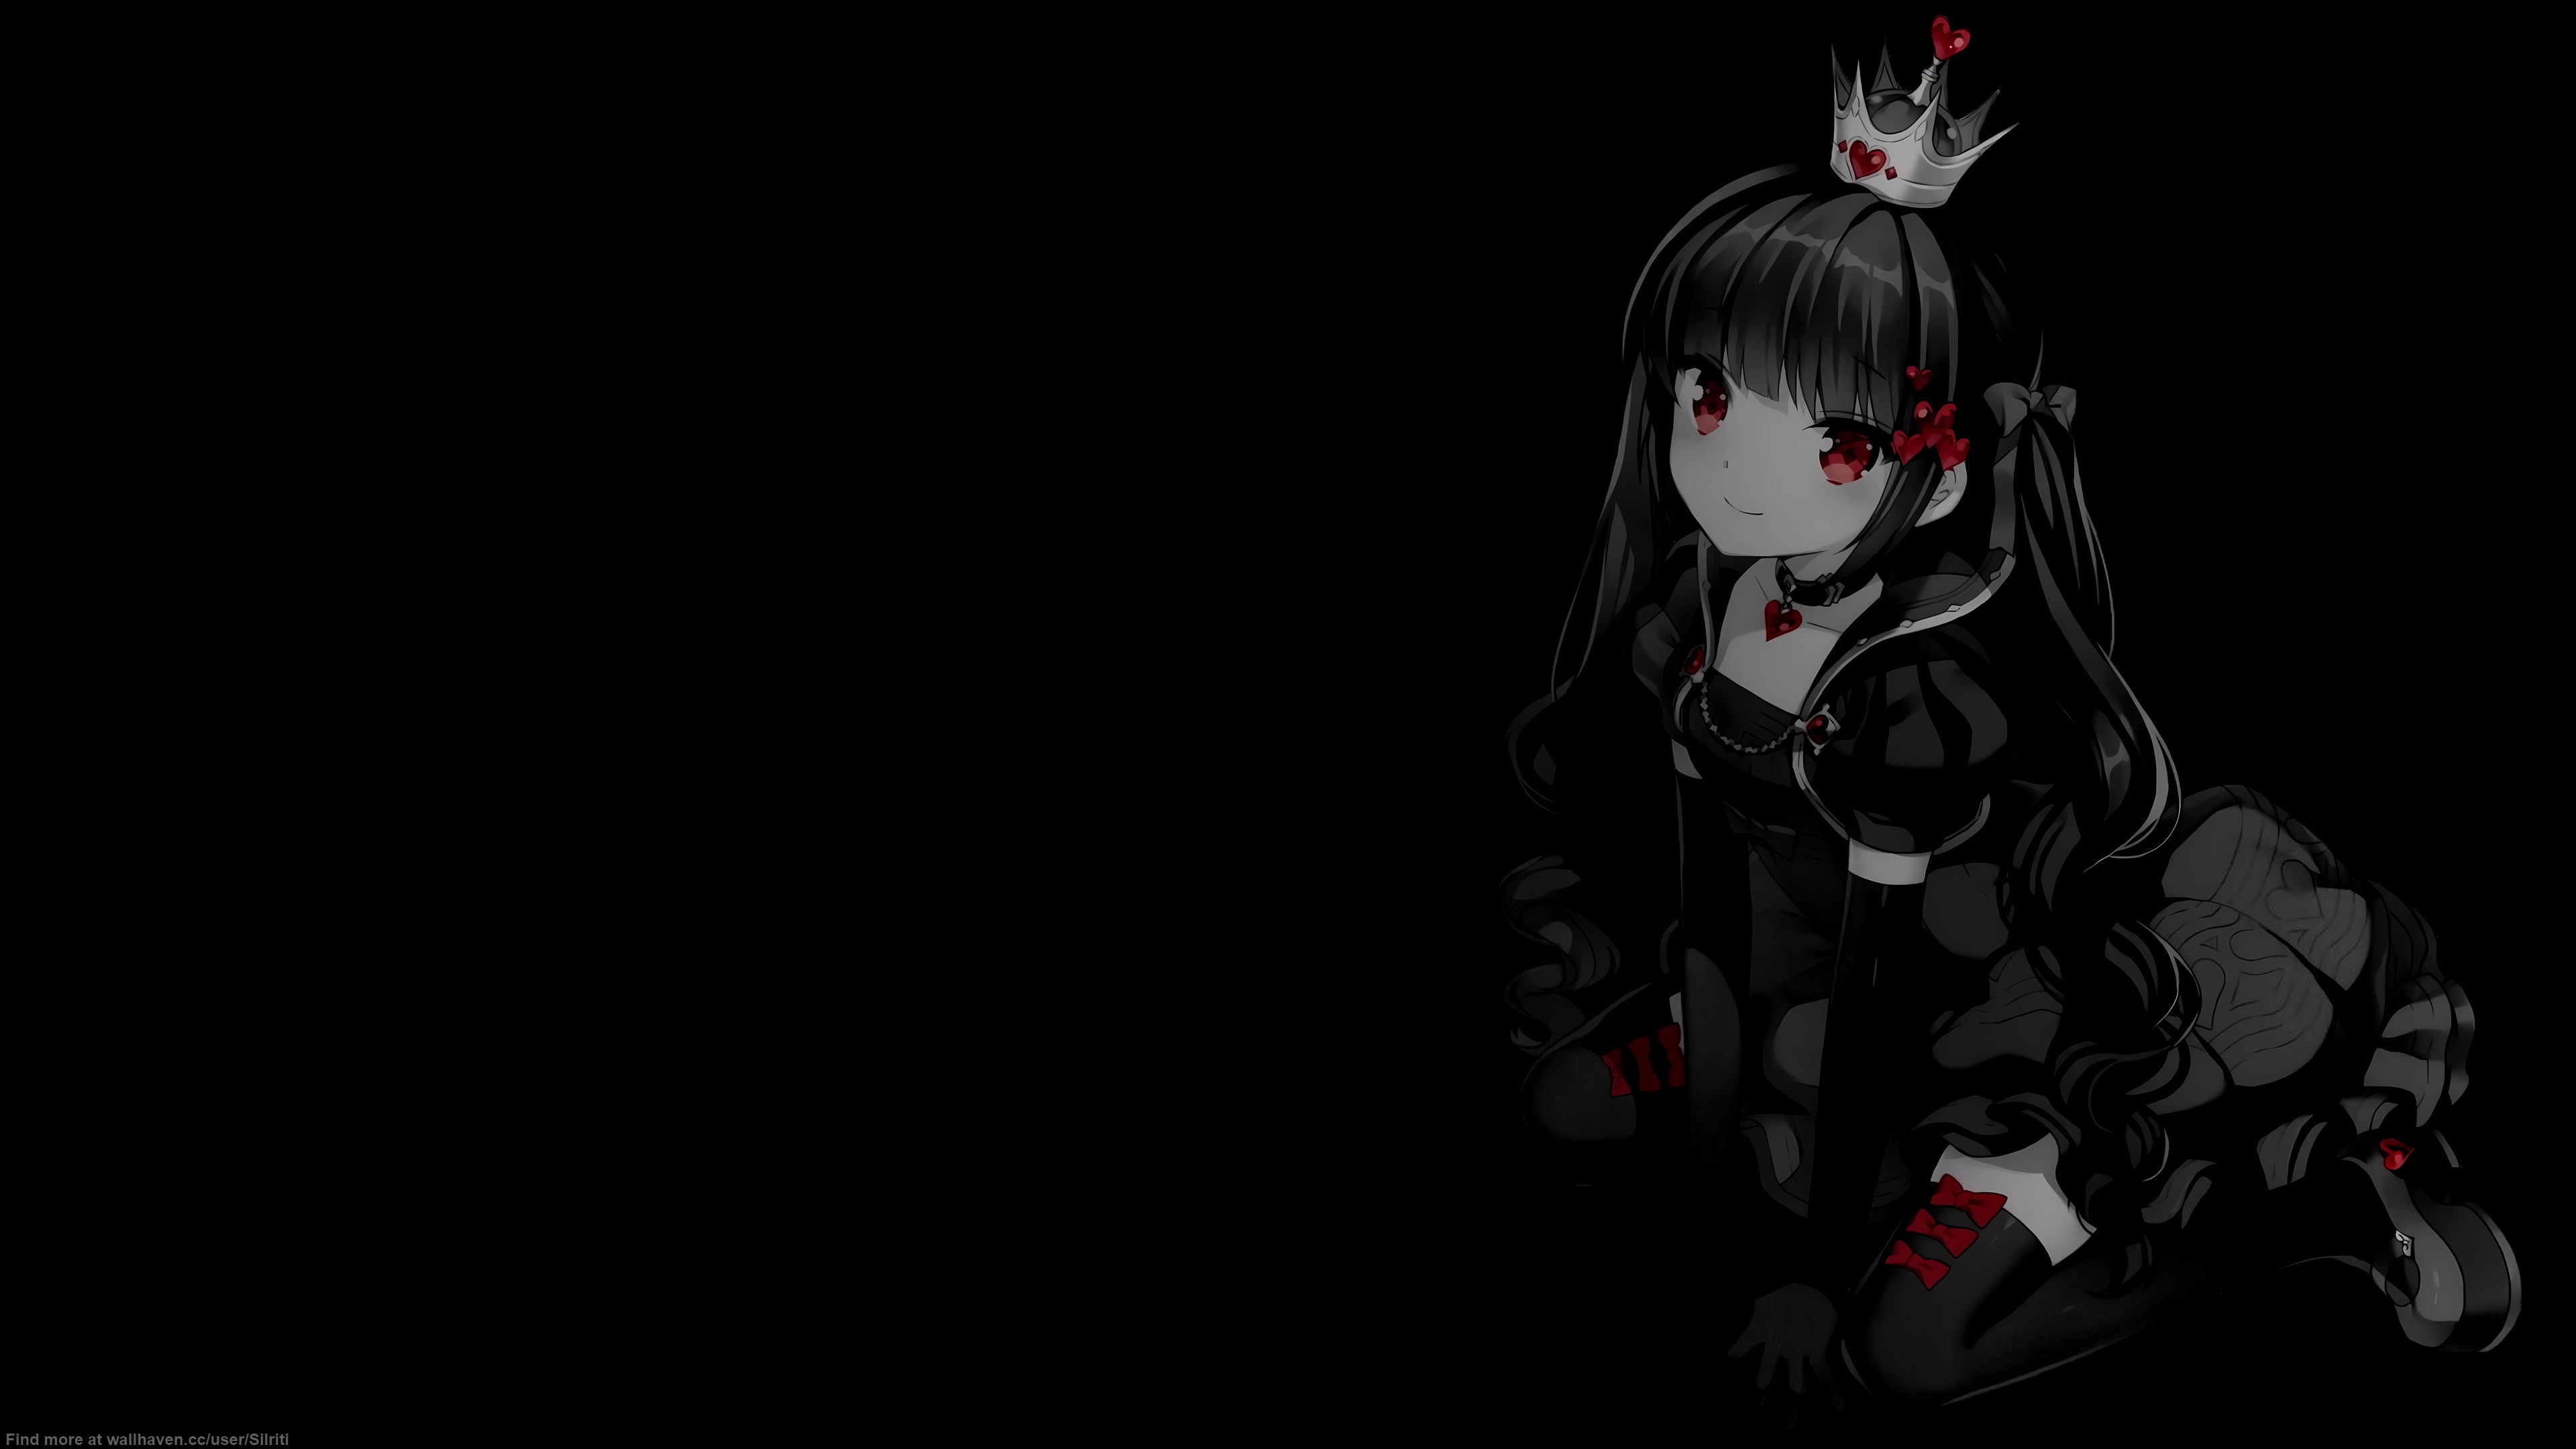 Anime 3840x2160 selective coloring black background dark background simple background anime girls minimalism crown dress elbow gloves smiling choker